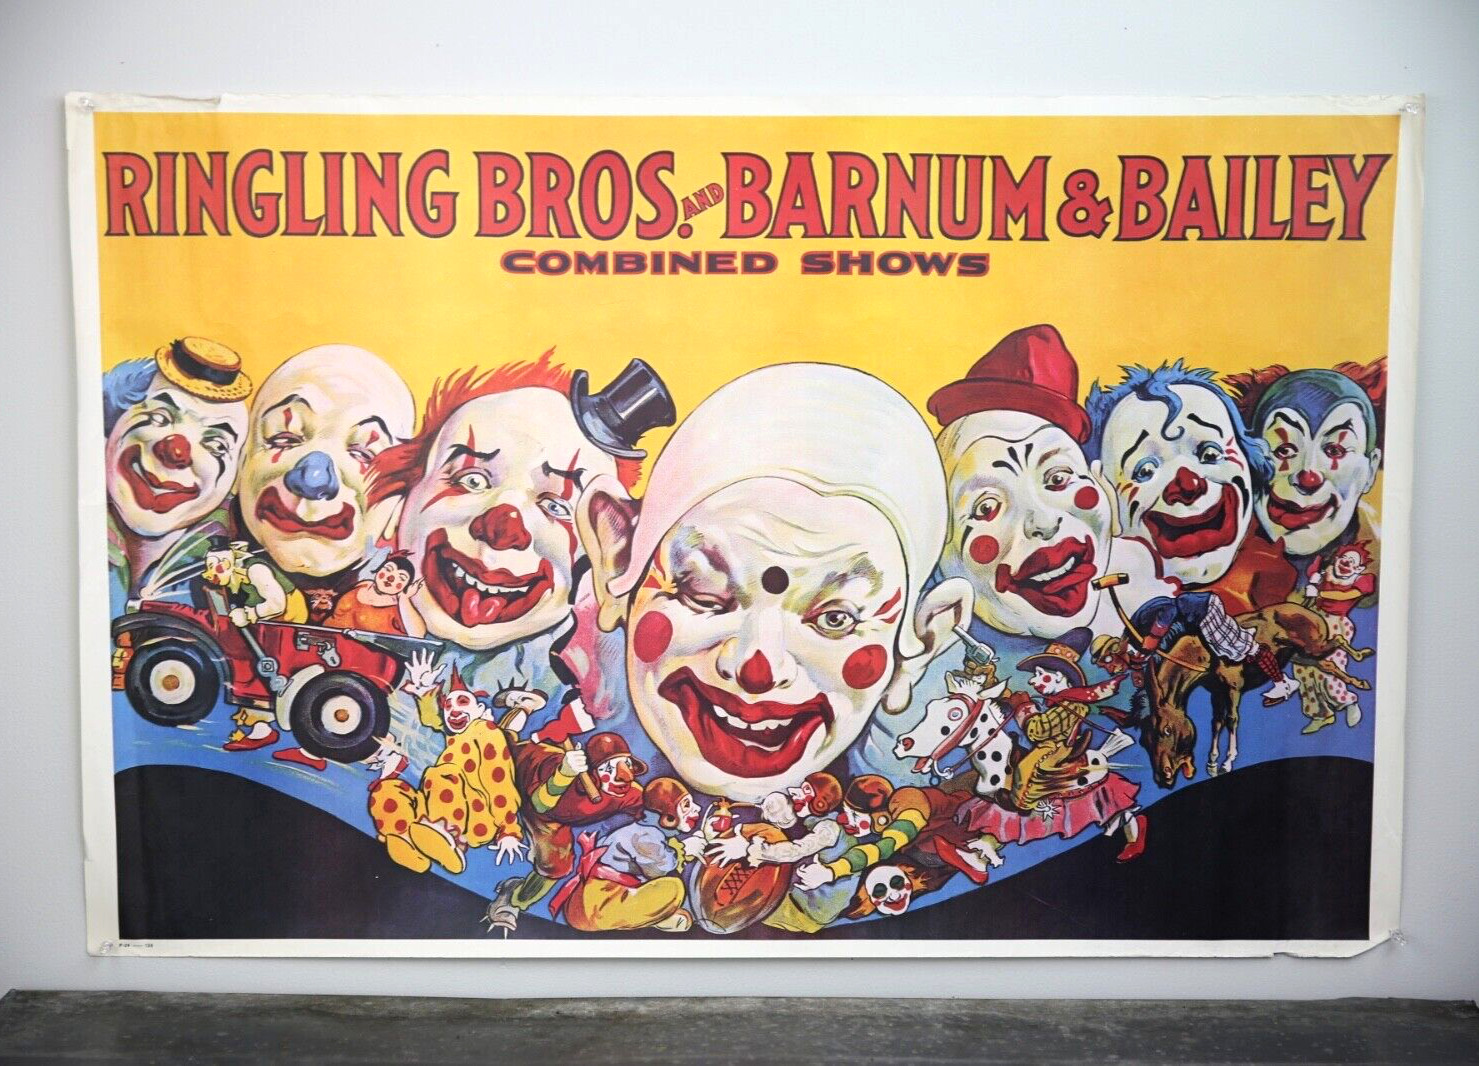 Vintage 1980's Ringling Brothers Barnum & Bailey Circus Clowns Poster carnival